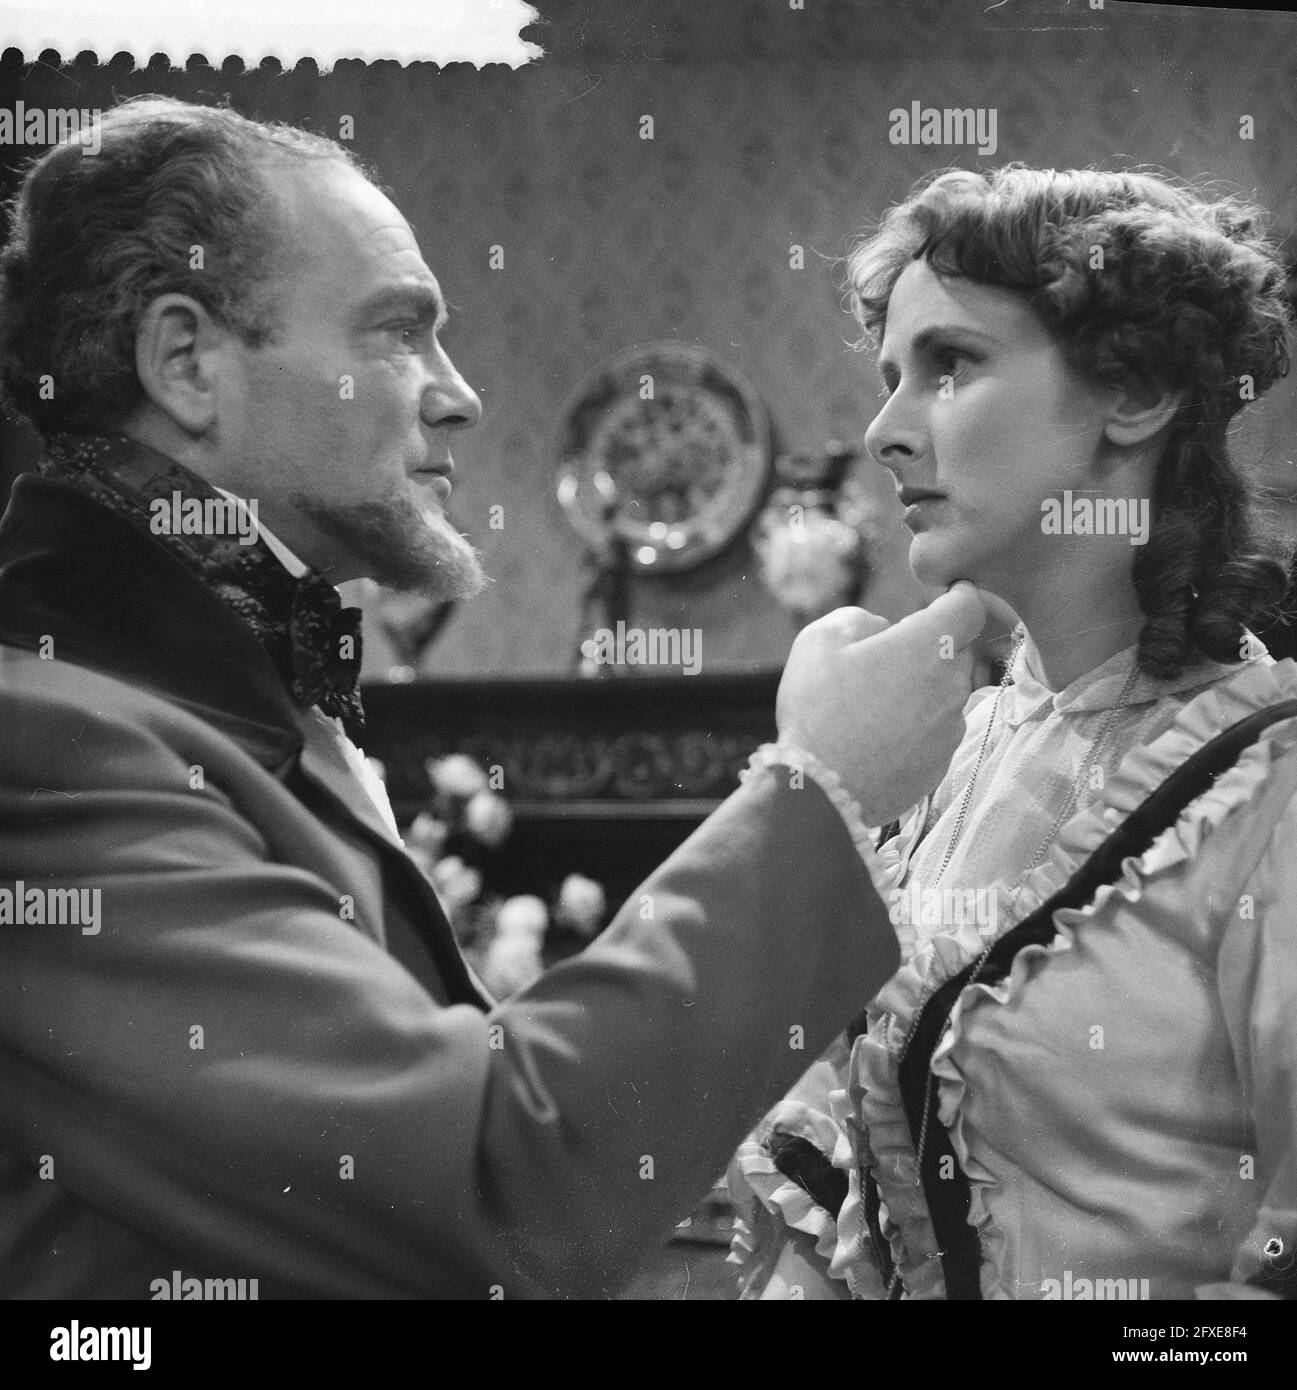 Television play The Heiress, left Max Croiset as Dr. Austin Sloper, right Manon Alving as Catherine Sloper, December 16, 1959, Actors, actresses, television plays, The Netherlands, 20th century press agency photo, news to remember, documentary, historic photography 1945-1990, visual stories, human history of the Twentieth Century, capturing moments in time Stock Photo